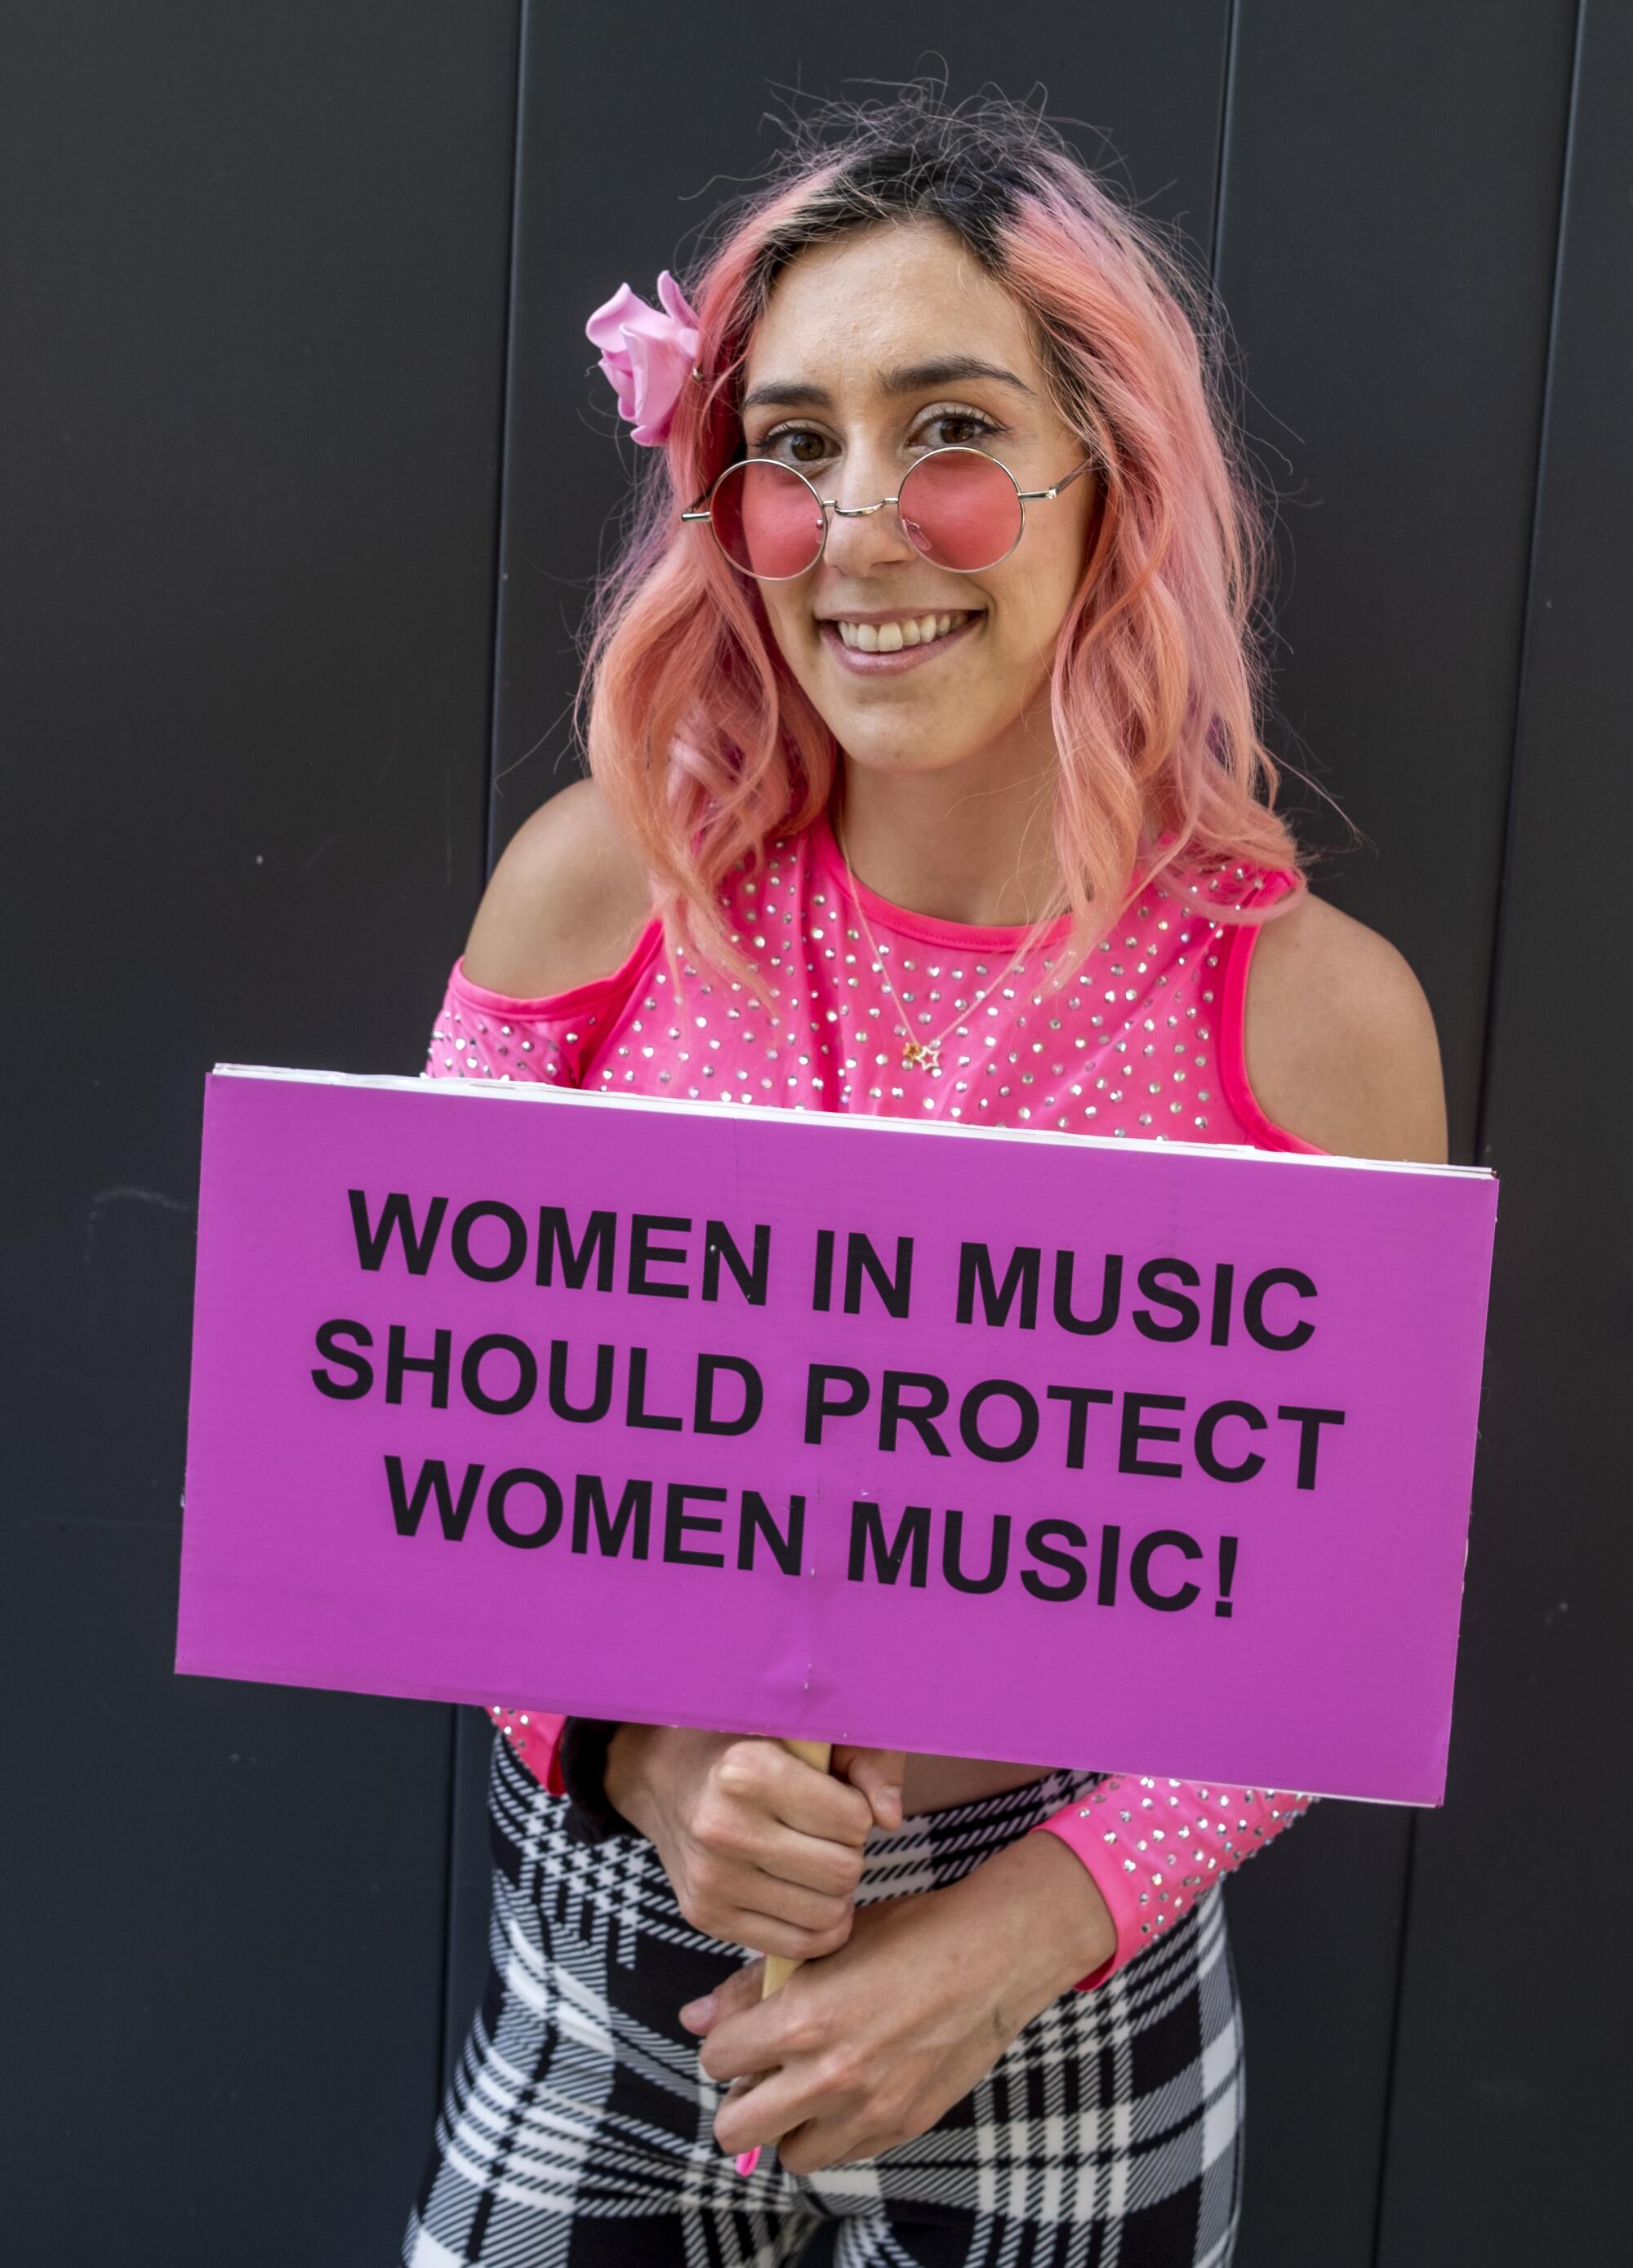 A woman holds a sign that reads "Women in music should protect women music"